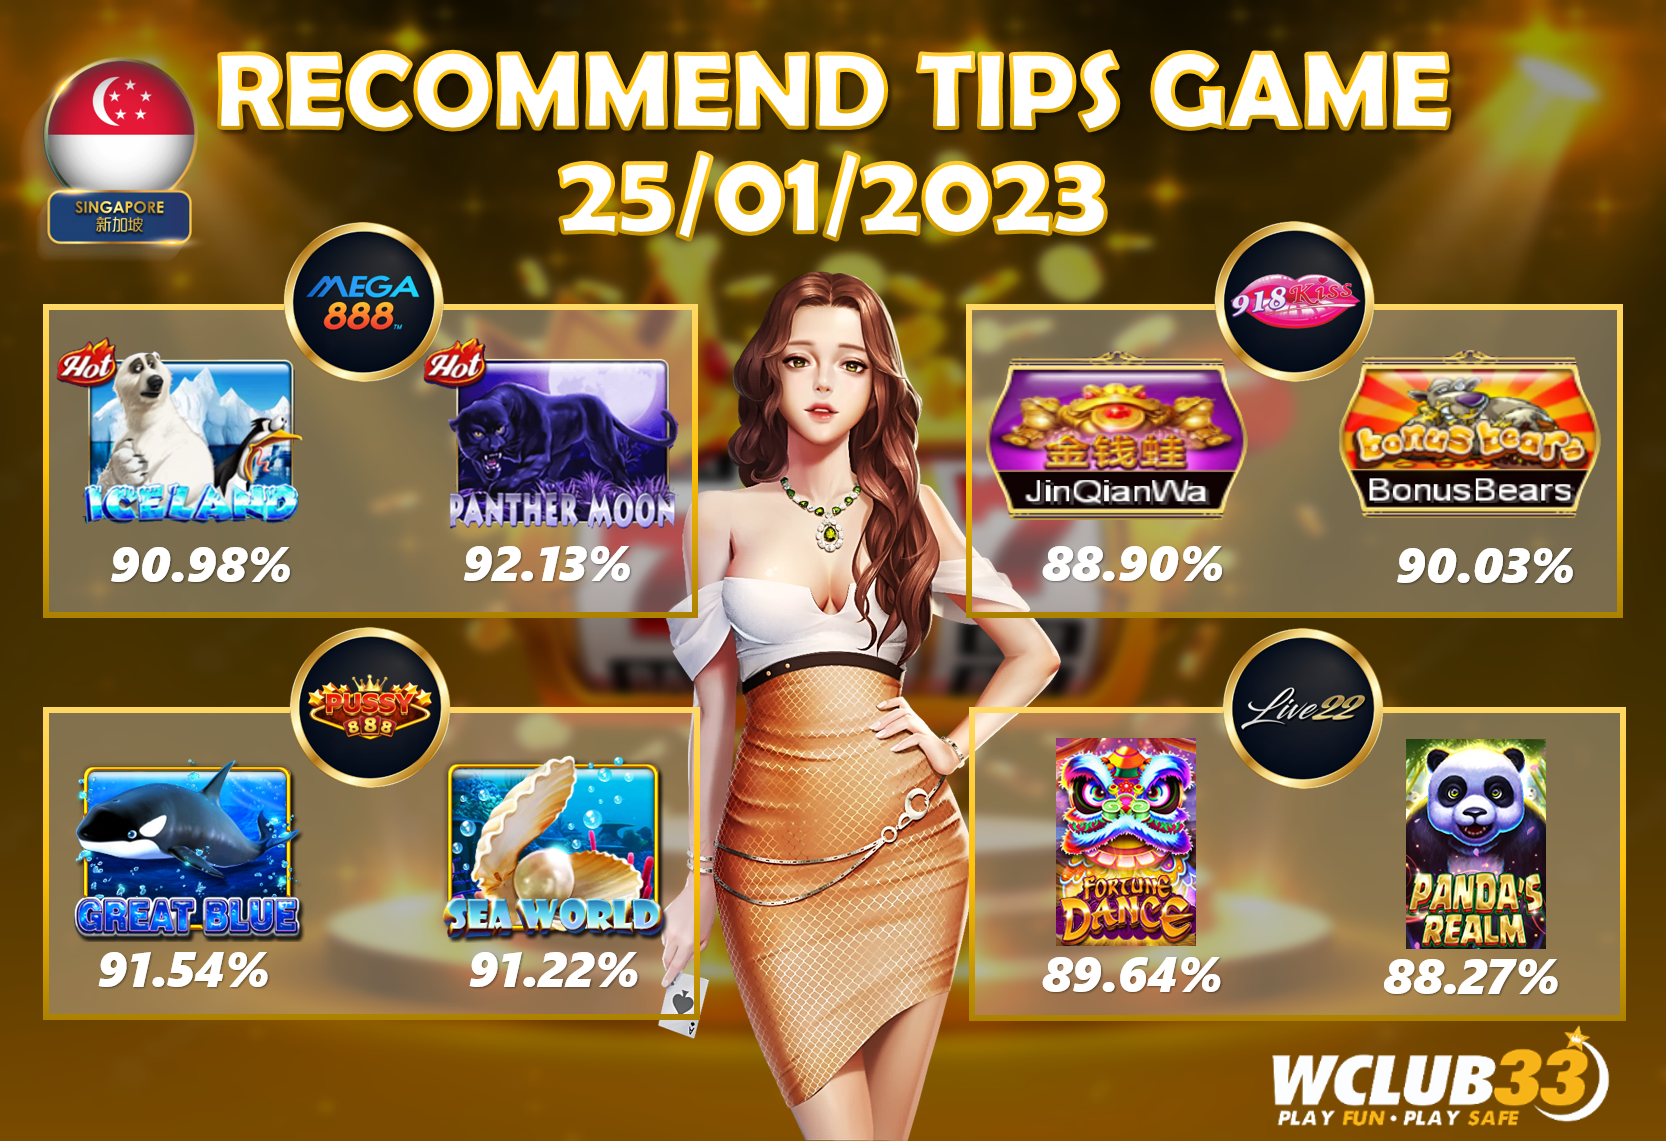 UPDATE TIPS GAME 25/01